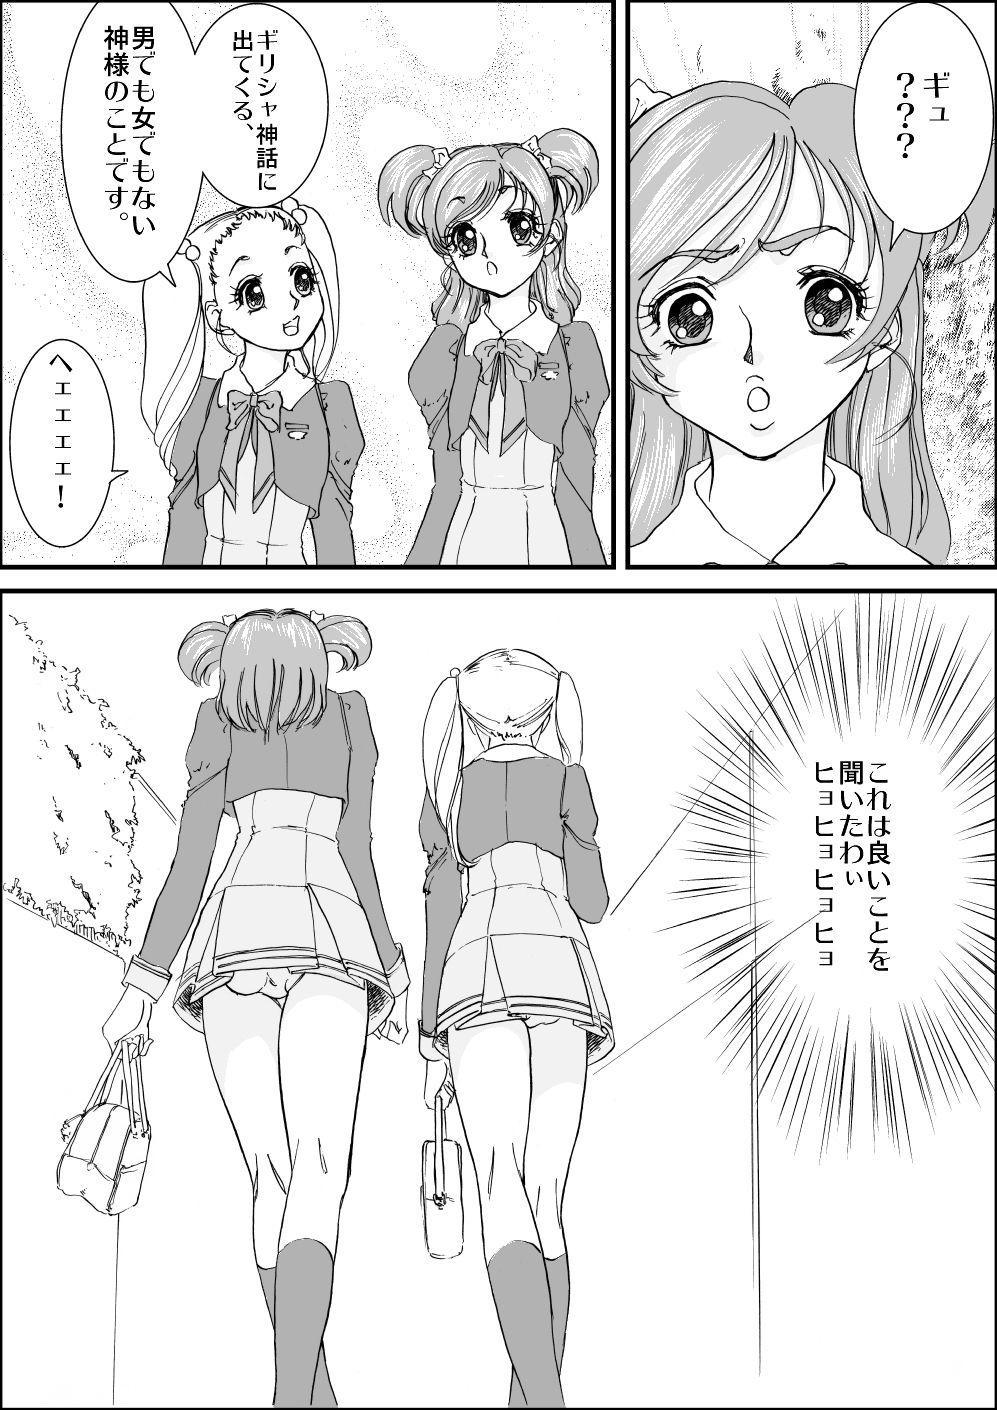 Mulher Kinoko no ie ni Goyoushin - Pretty cure Yes precure 5 First - Page 2